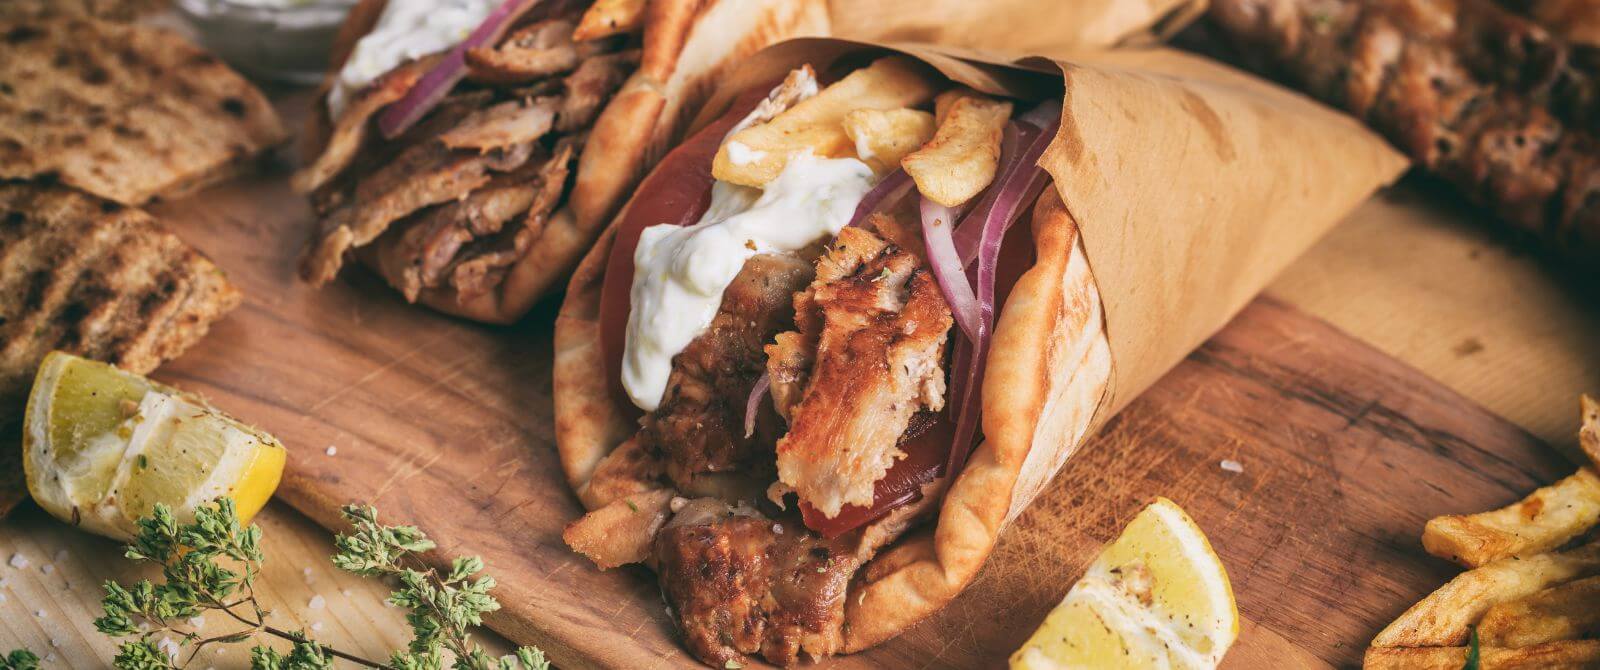 gyros willed with meat and drizzled with yogurt